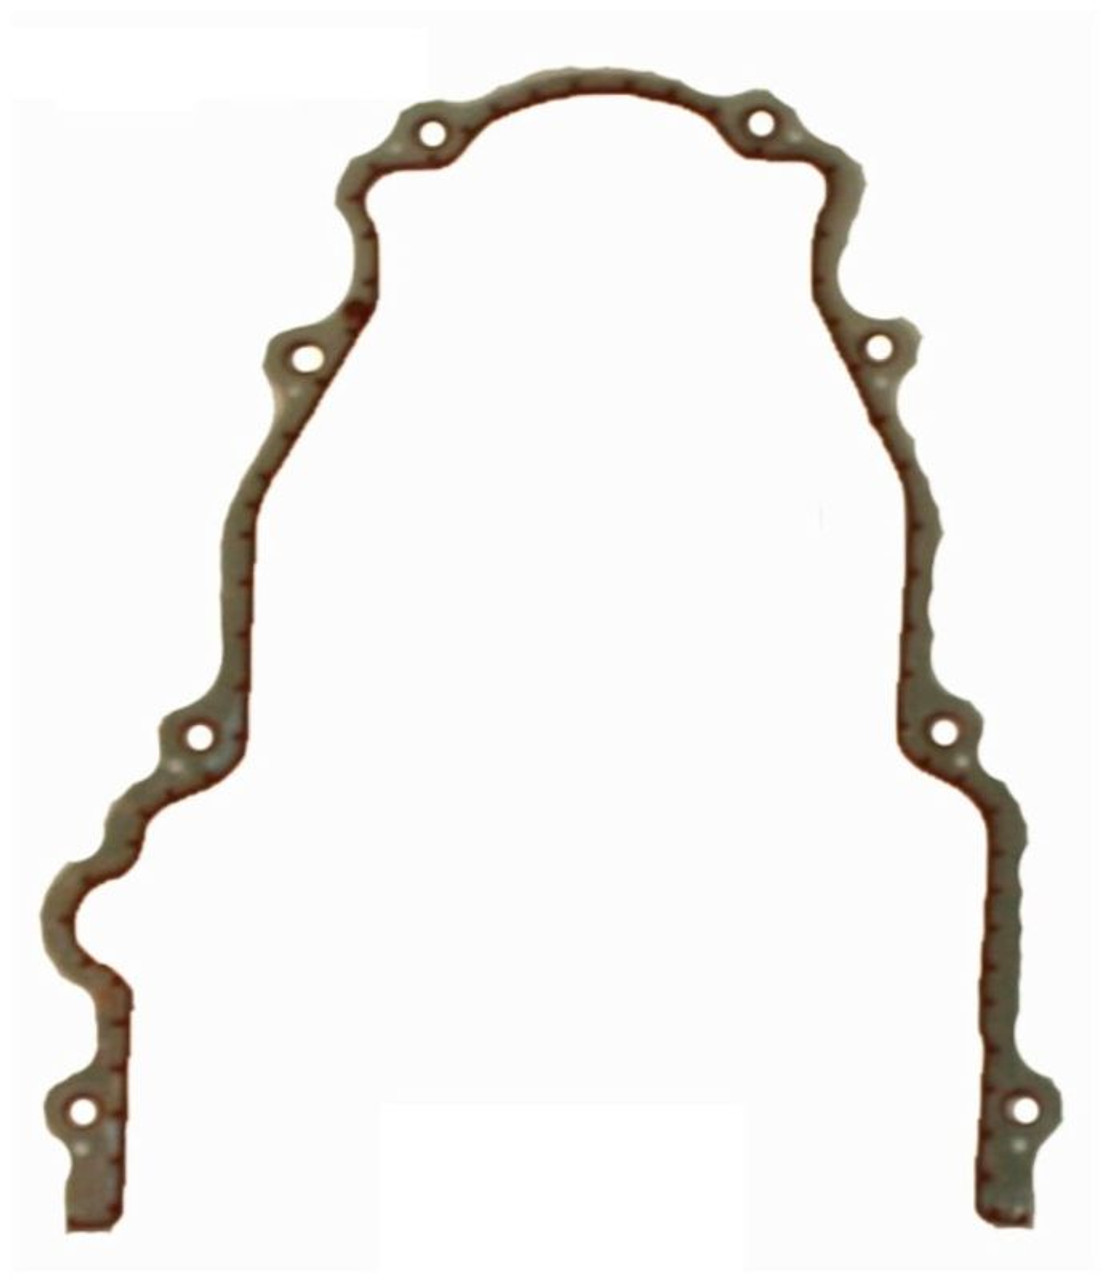 2009 Cadillac Escalade EXT 6.2L Engine Timing Cover Gasket TCG293-A -549